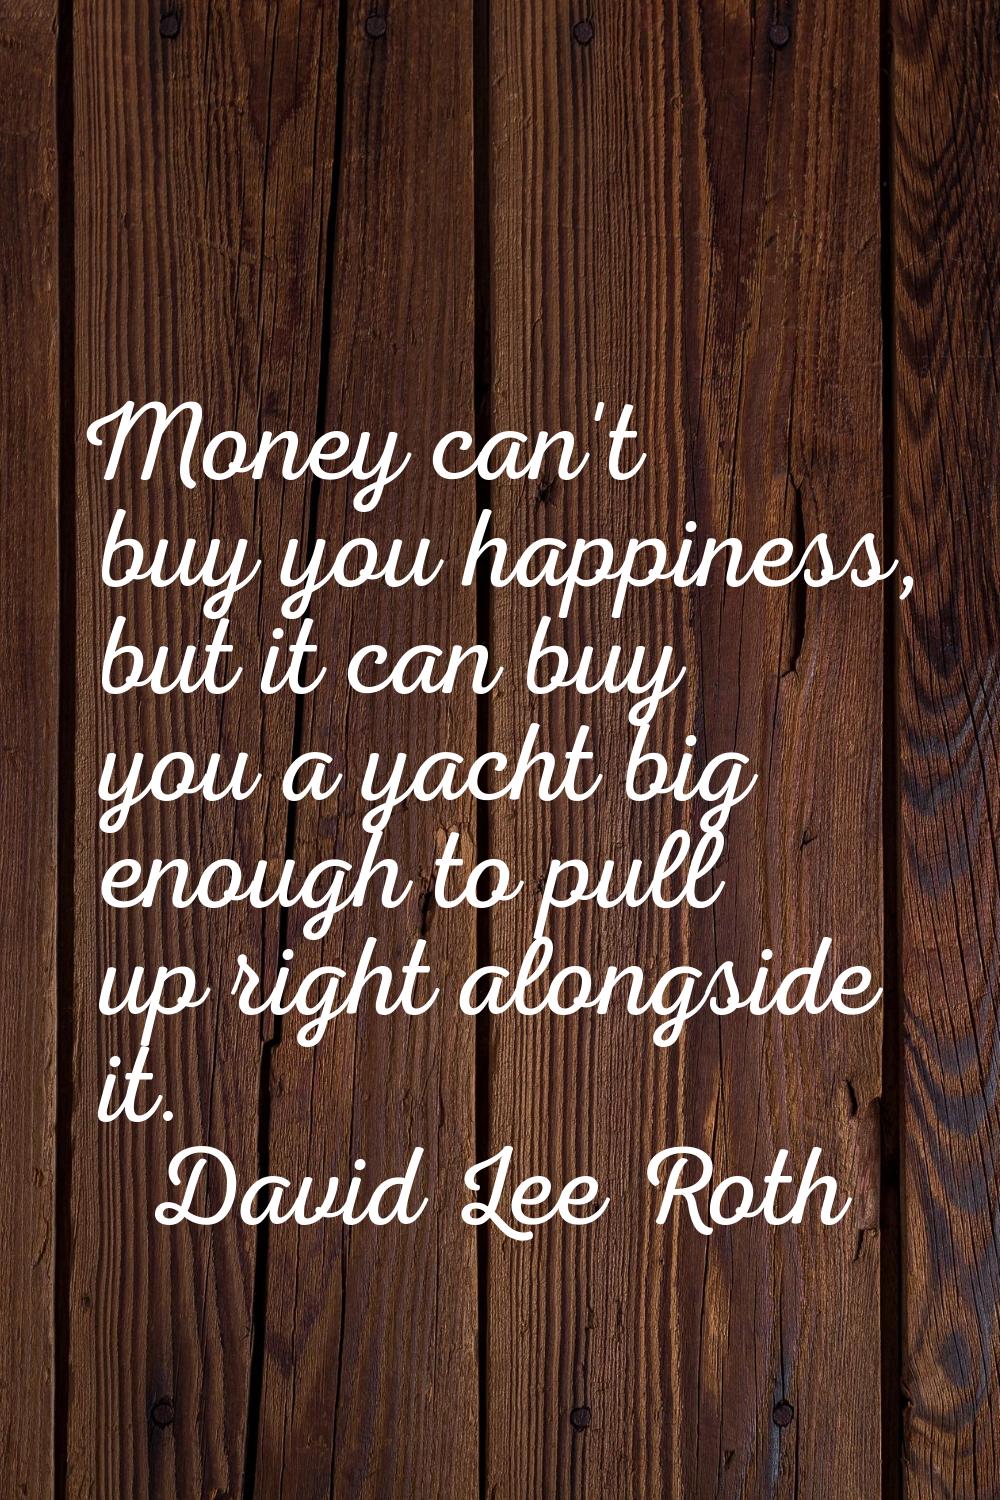 Money can't buy you happiness, but it can buy you a yacht big enough to pull up right alongside it.